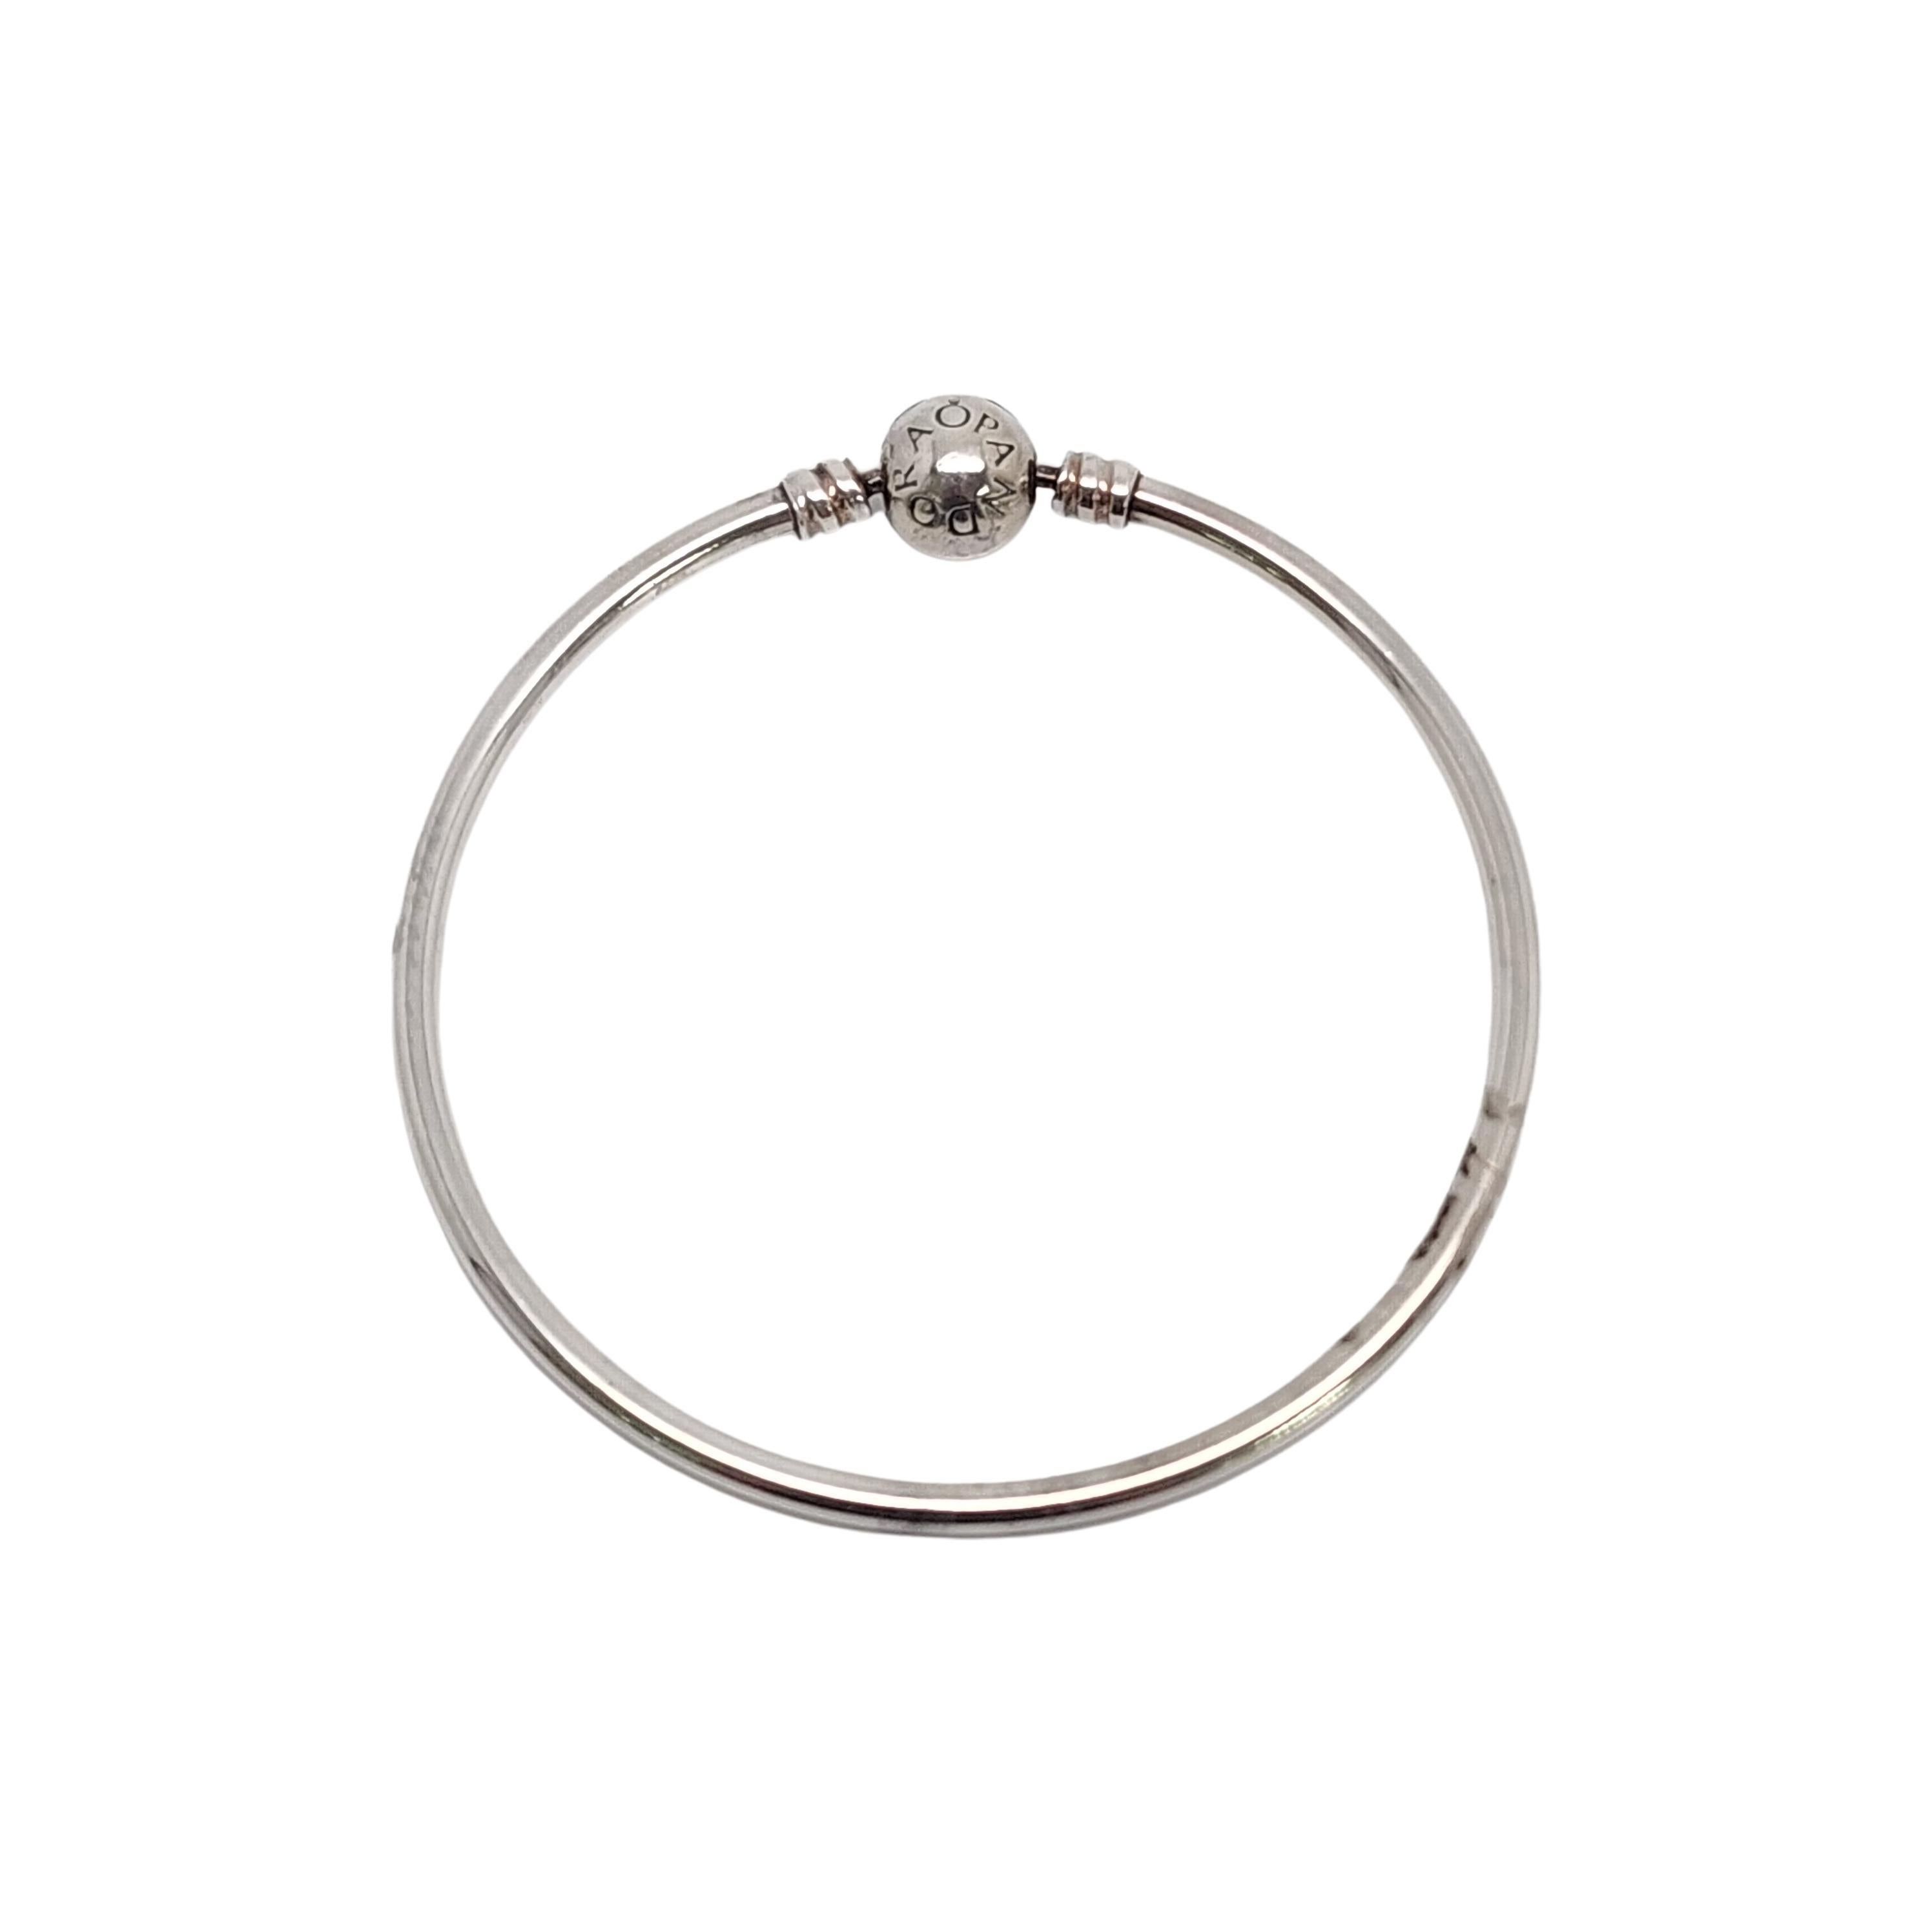 Authentic Pandora Moments Sterling Silver Bangle Bracelet.

#590713-19

Pandora's bangle bracelet featuring a ball clasp.

Weighs approx 5.8dwt, 9.0g

Measures approx 7 1/4